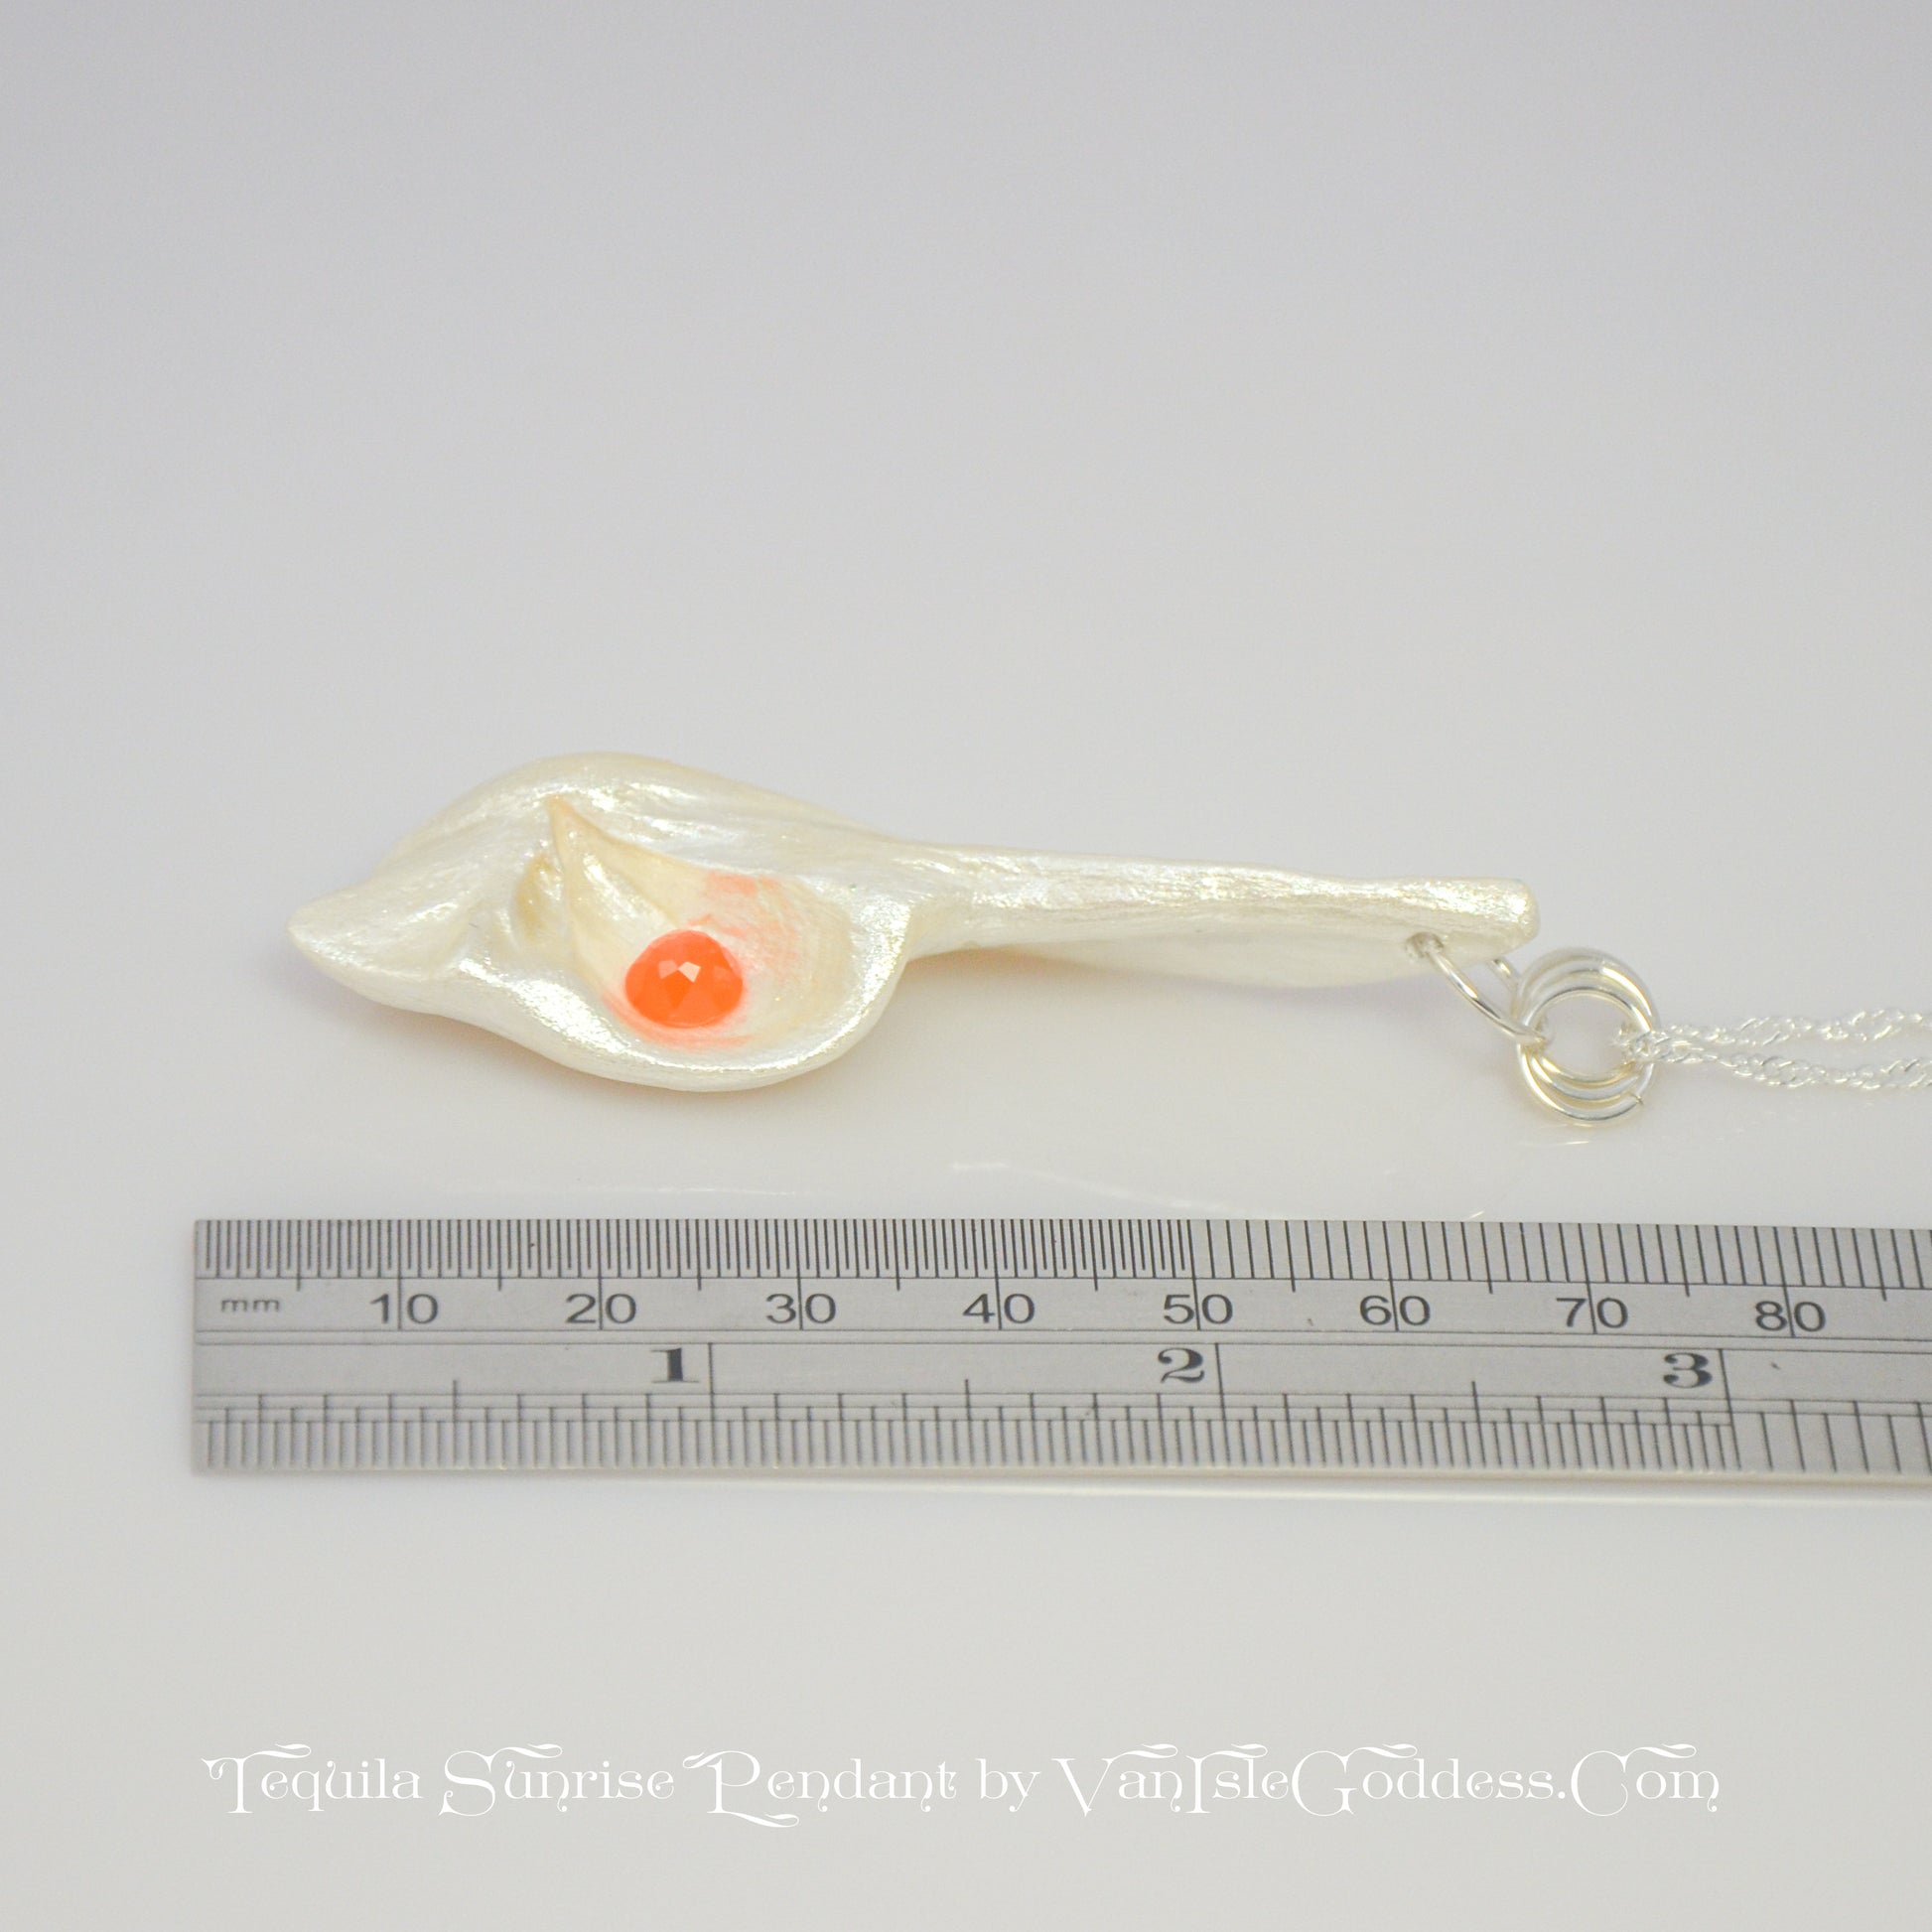 Tequila Sunrise natural seashell pendant a rose cut Carnelian gemstone. The pendant lays next to a ruler to show the viewer the length of the pendant.